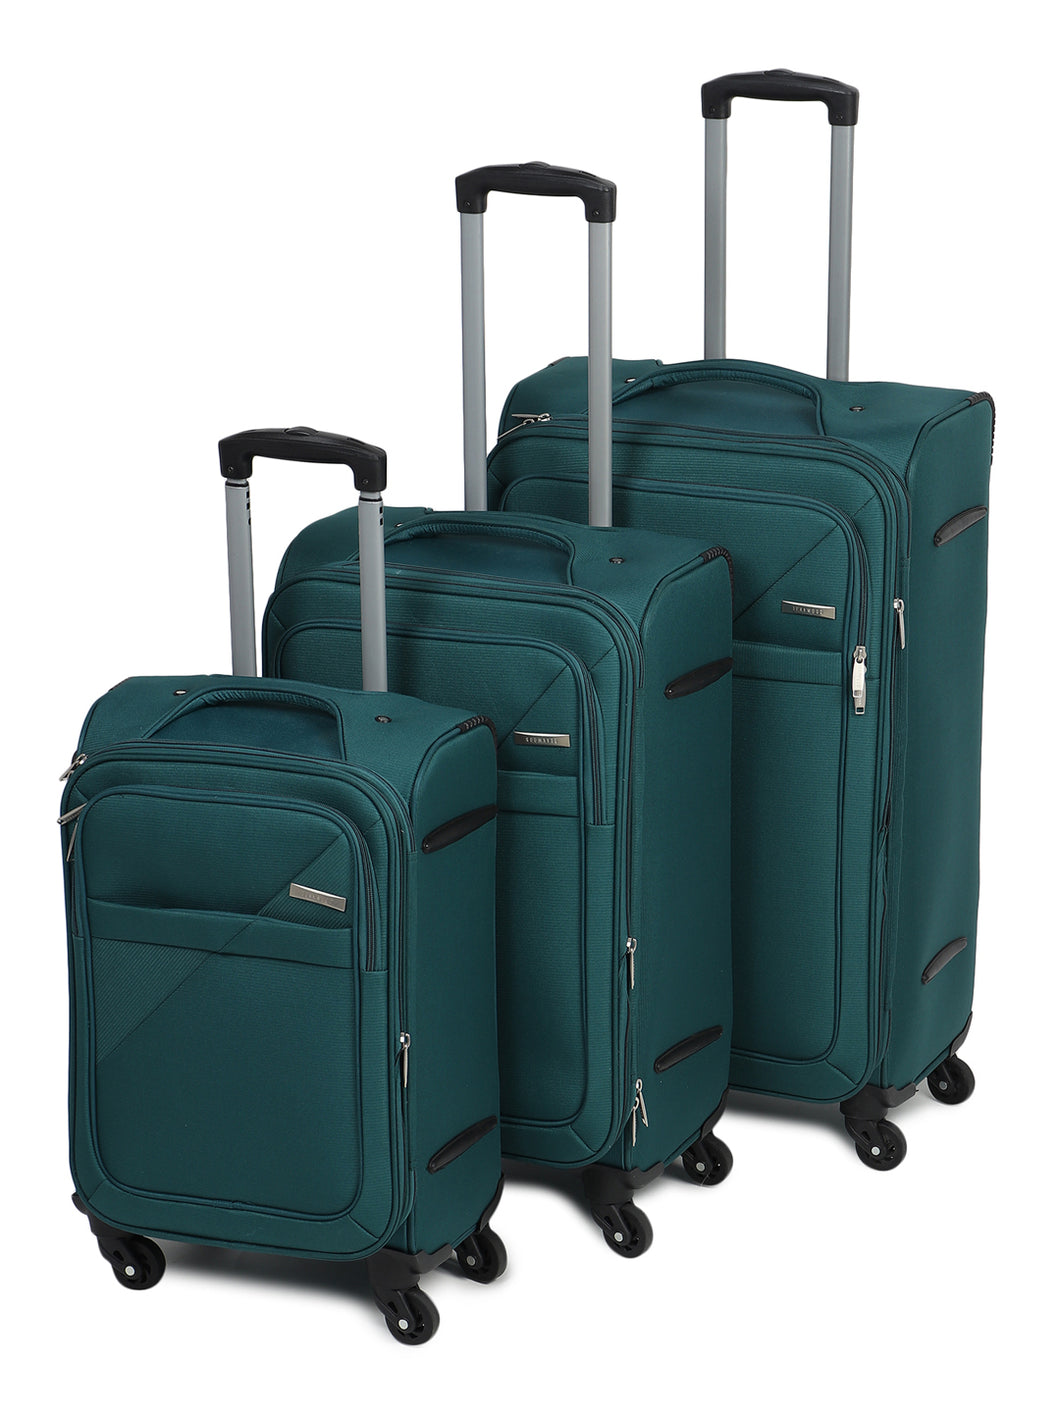 Teal Textured Soft-Sided Cabin Trolley Suitcase